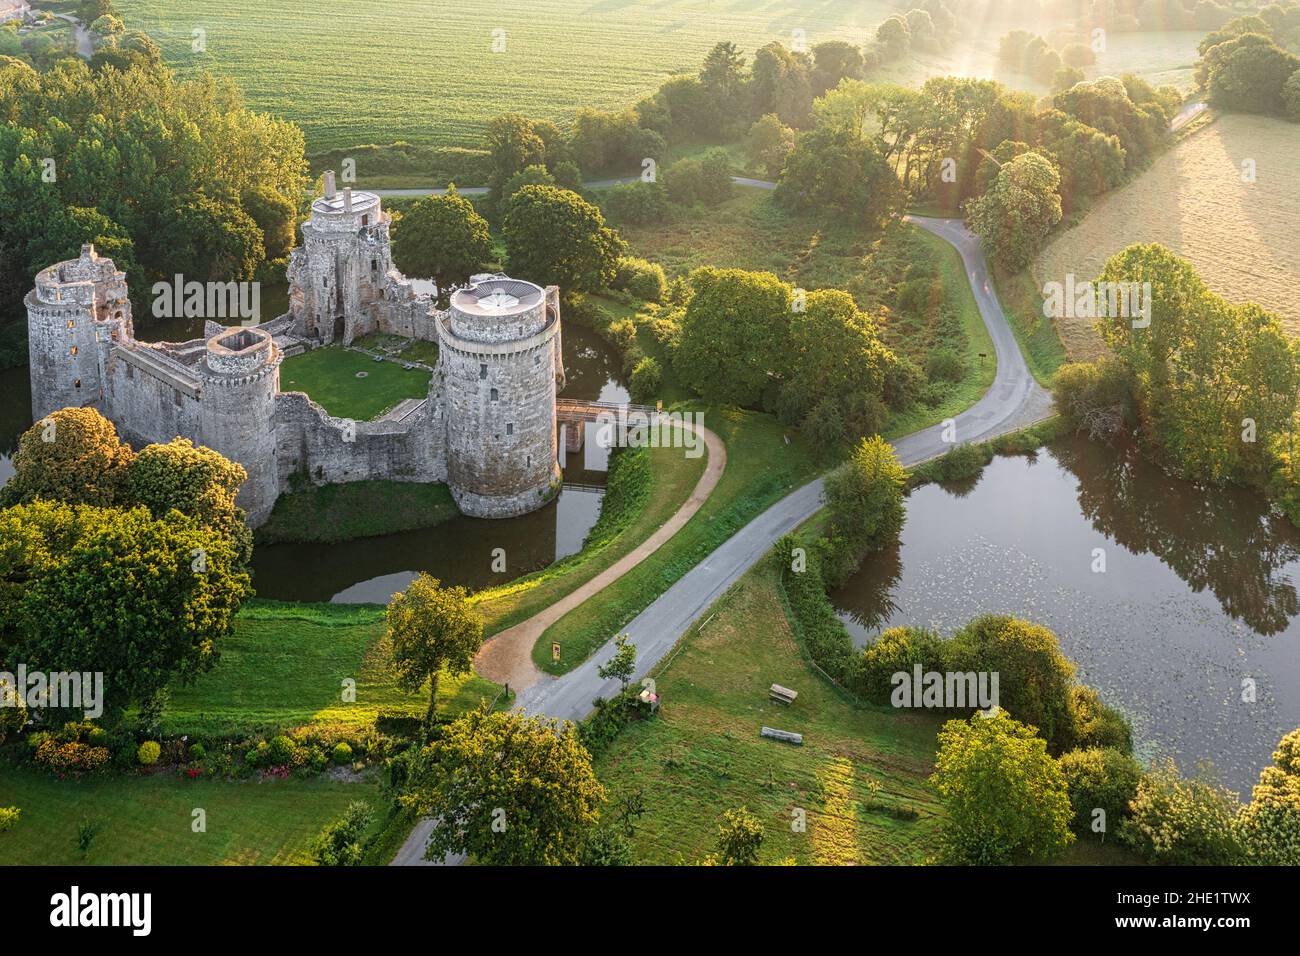 Aerial view of the ruins of the Hunaudaye castle in Cotes d'Armor, Brittany, France, in sunrise light Stock Photo